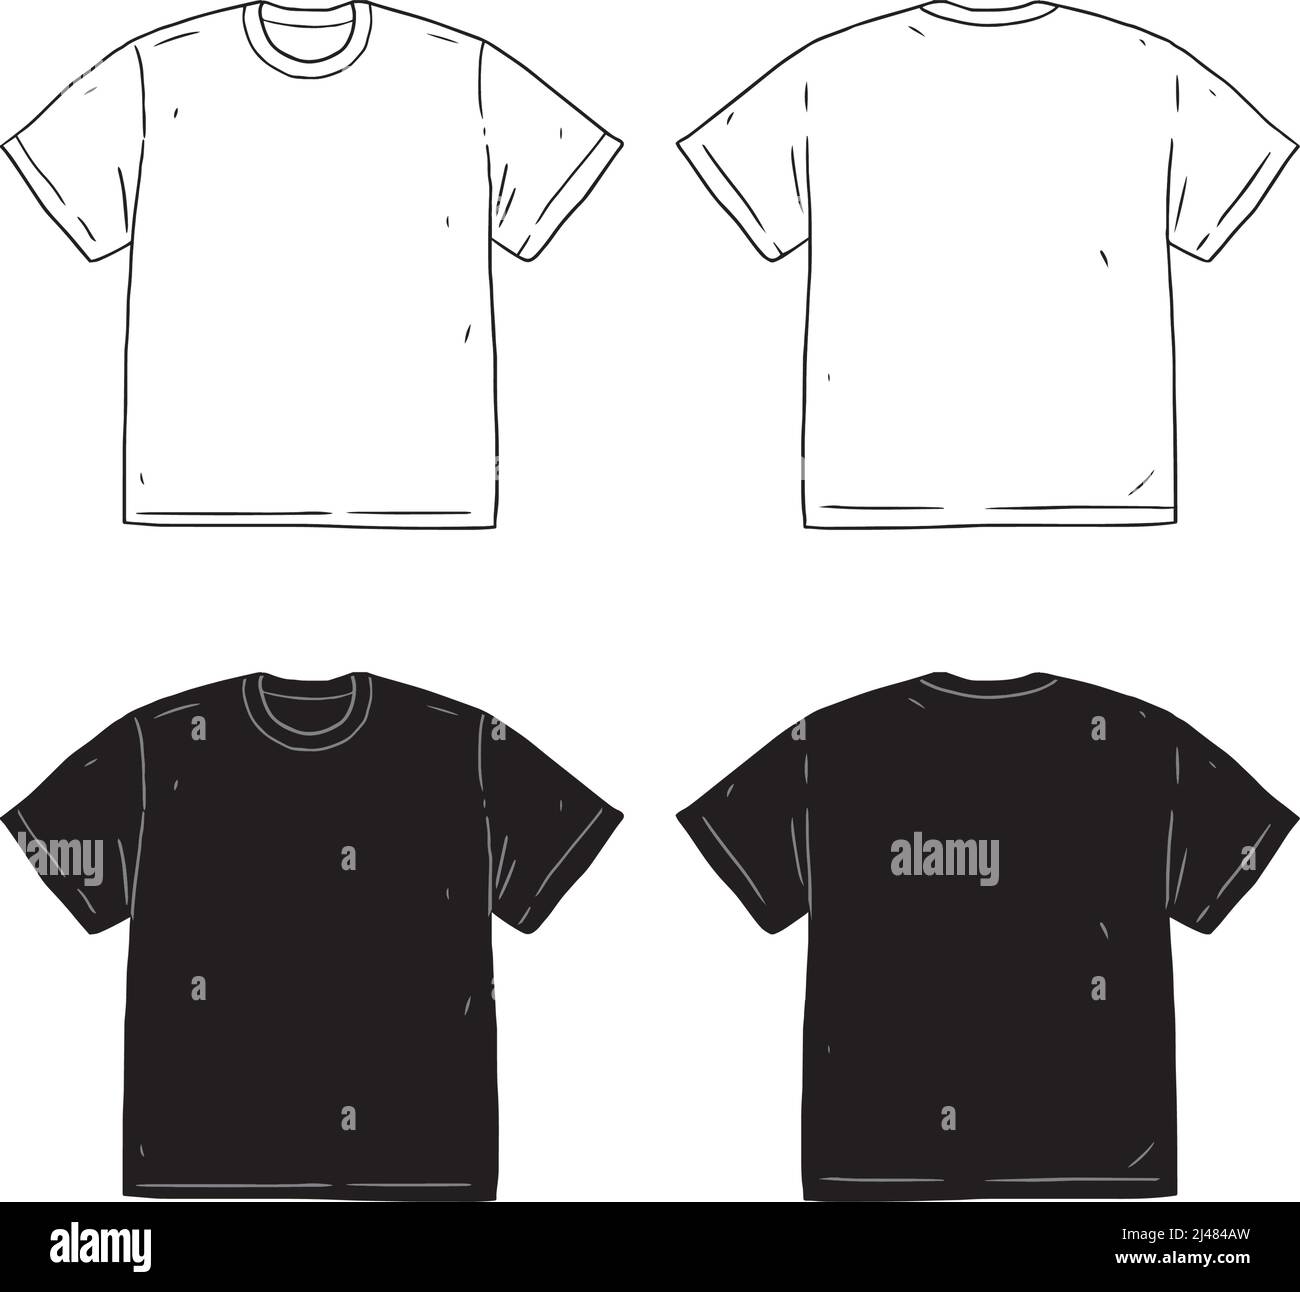 Black and white blank t-shirt mockup front back Vector Image